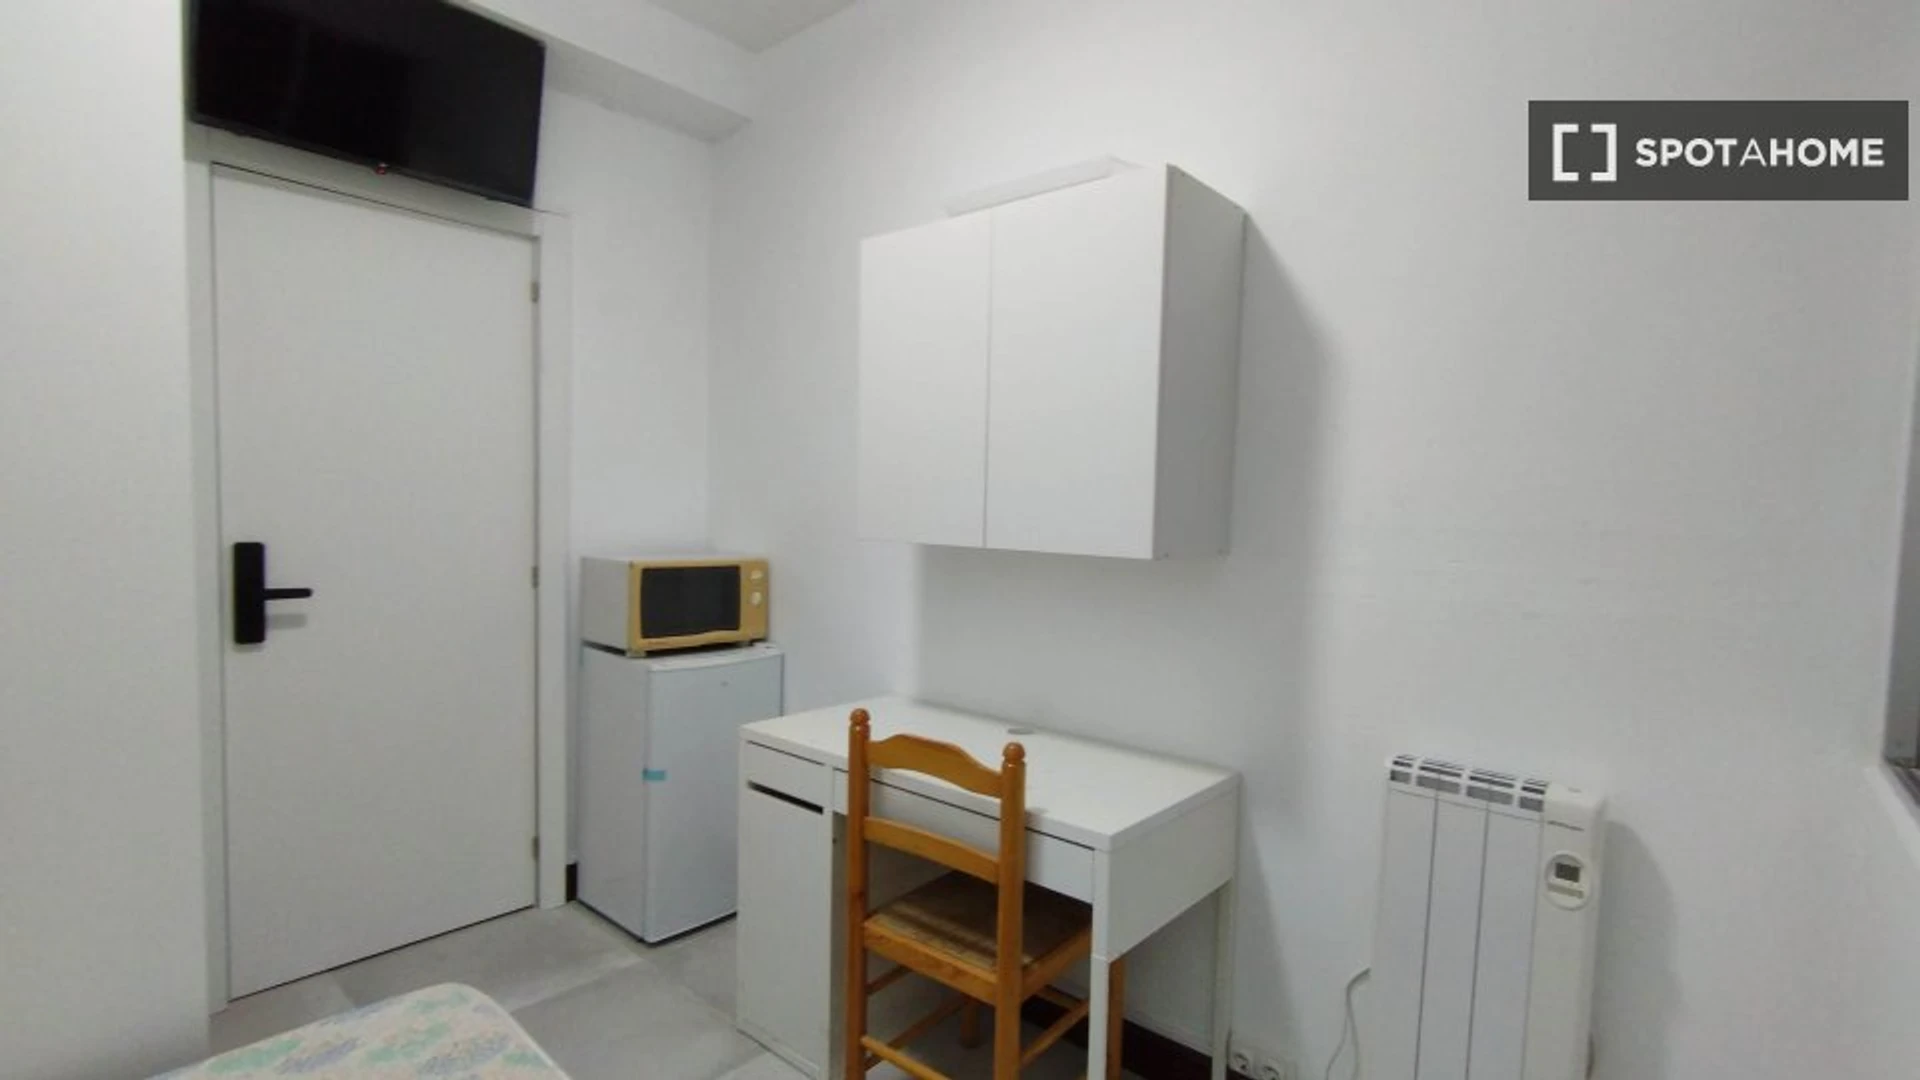 Room for rent in a shared flat in Bilbao